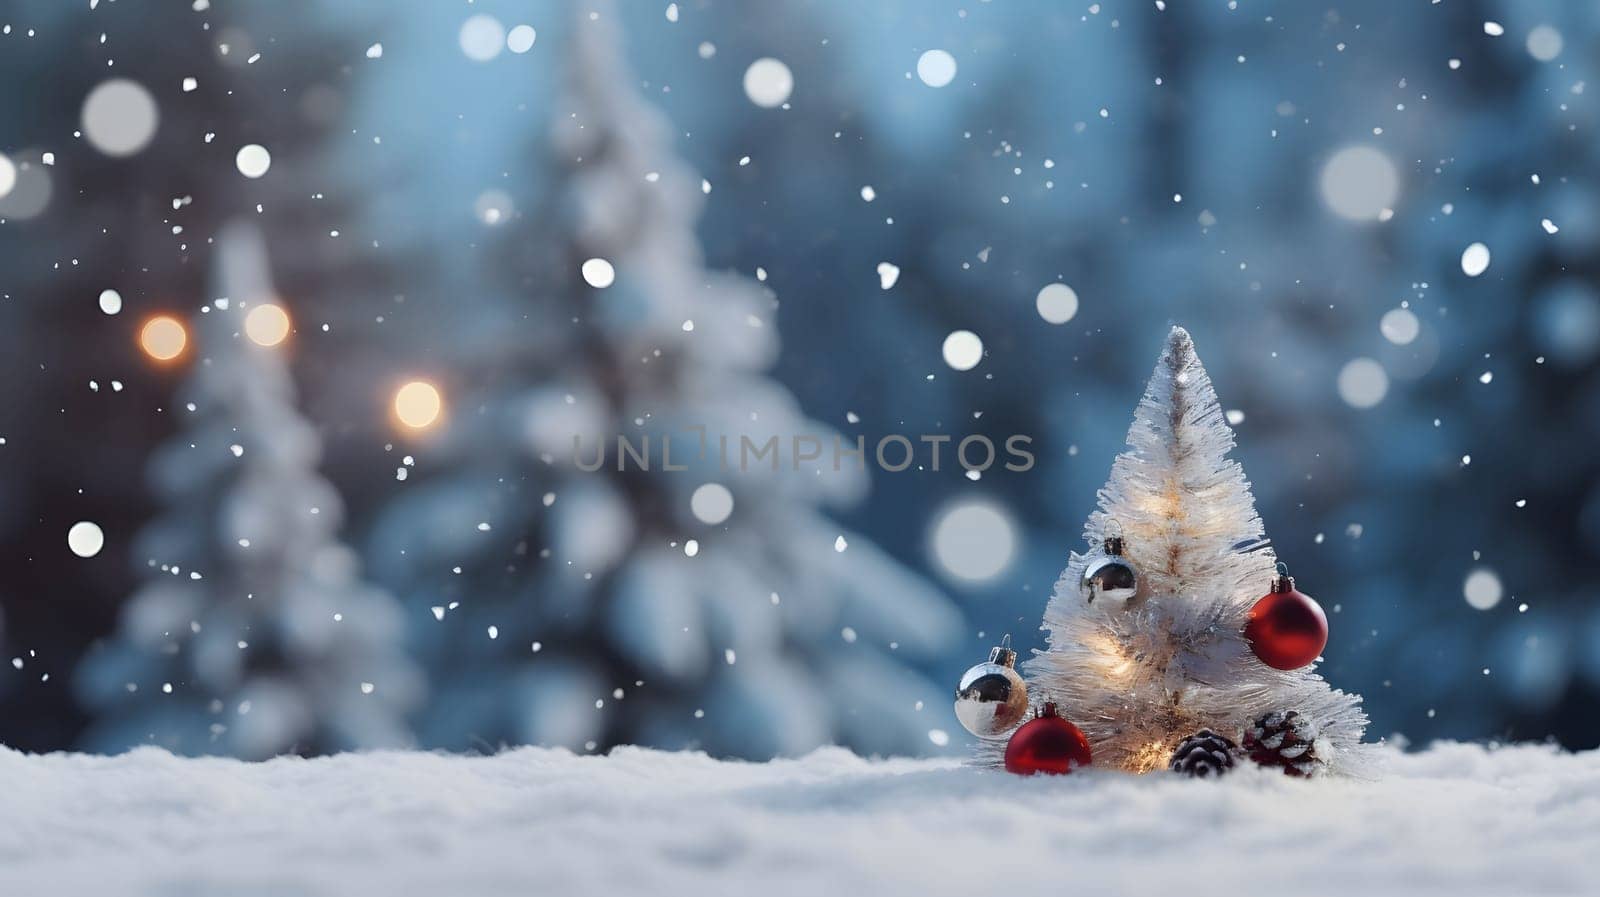 Small white Christmas trees on snow. In the background light bokeh effect and falling snow, smudged winter pine forest. Side view.Christmas banner with space for your own content. Blank field for the inscription.